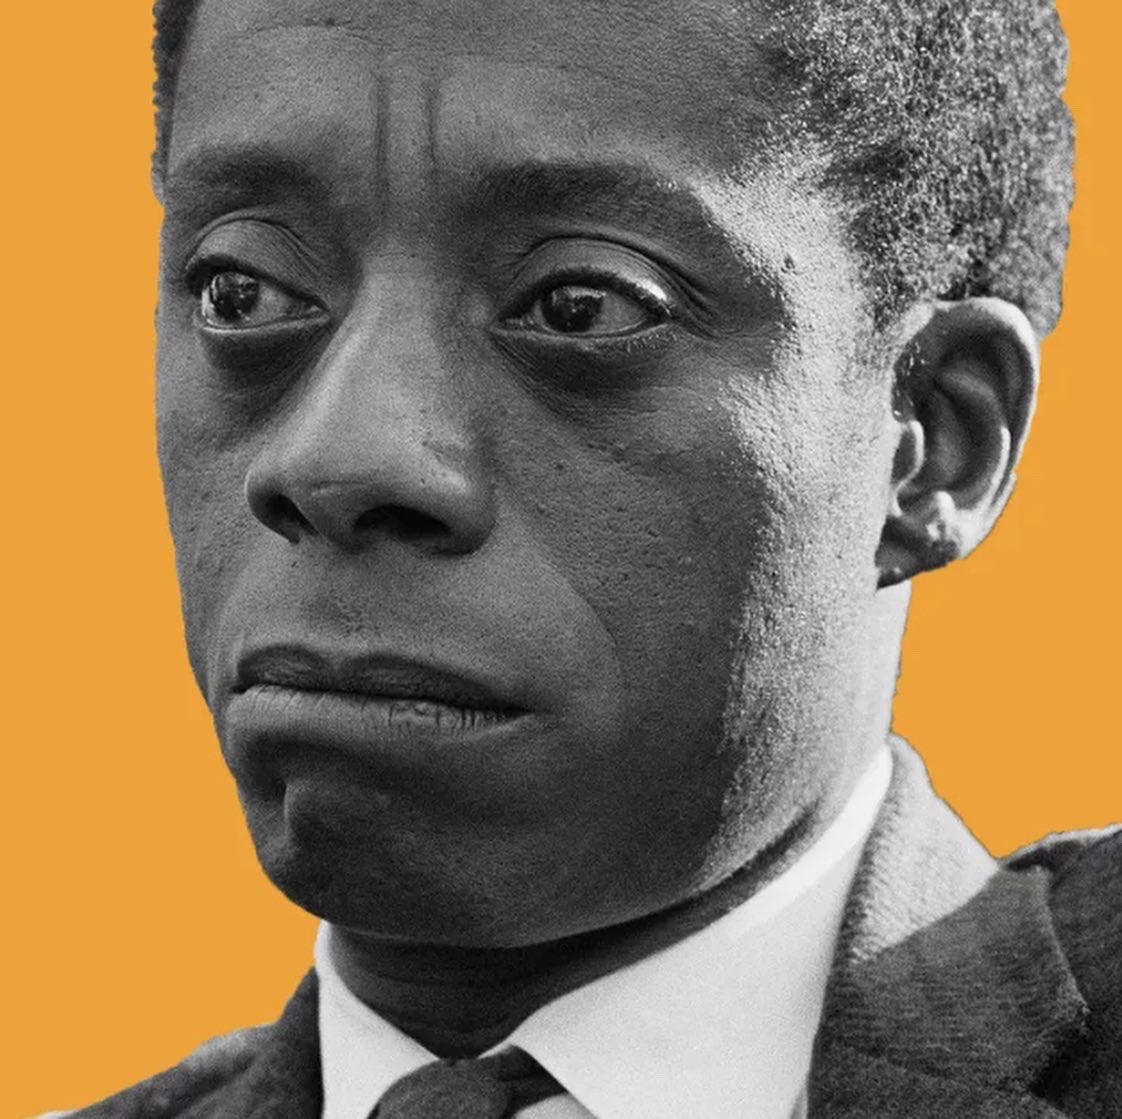 Overjoyed that we are getting to have another go at @mrJamesGraham brilliant @bestenemiesplay. I loved being a part of this production & getting to bring dear James Baldwin to that stage every night was the gift that kept on giving. Bring on November!!!